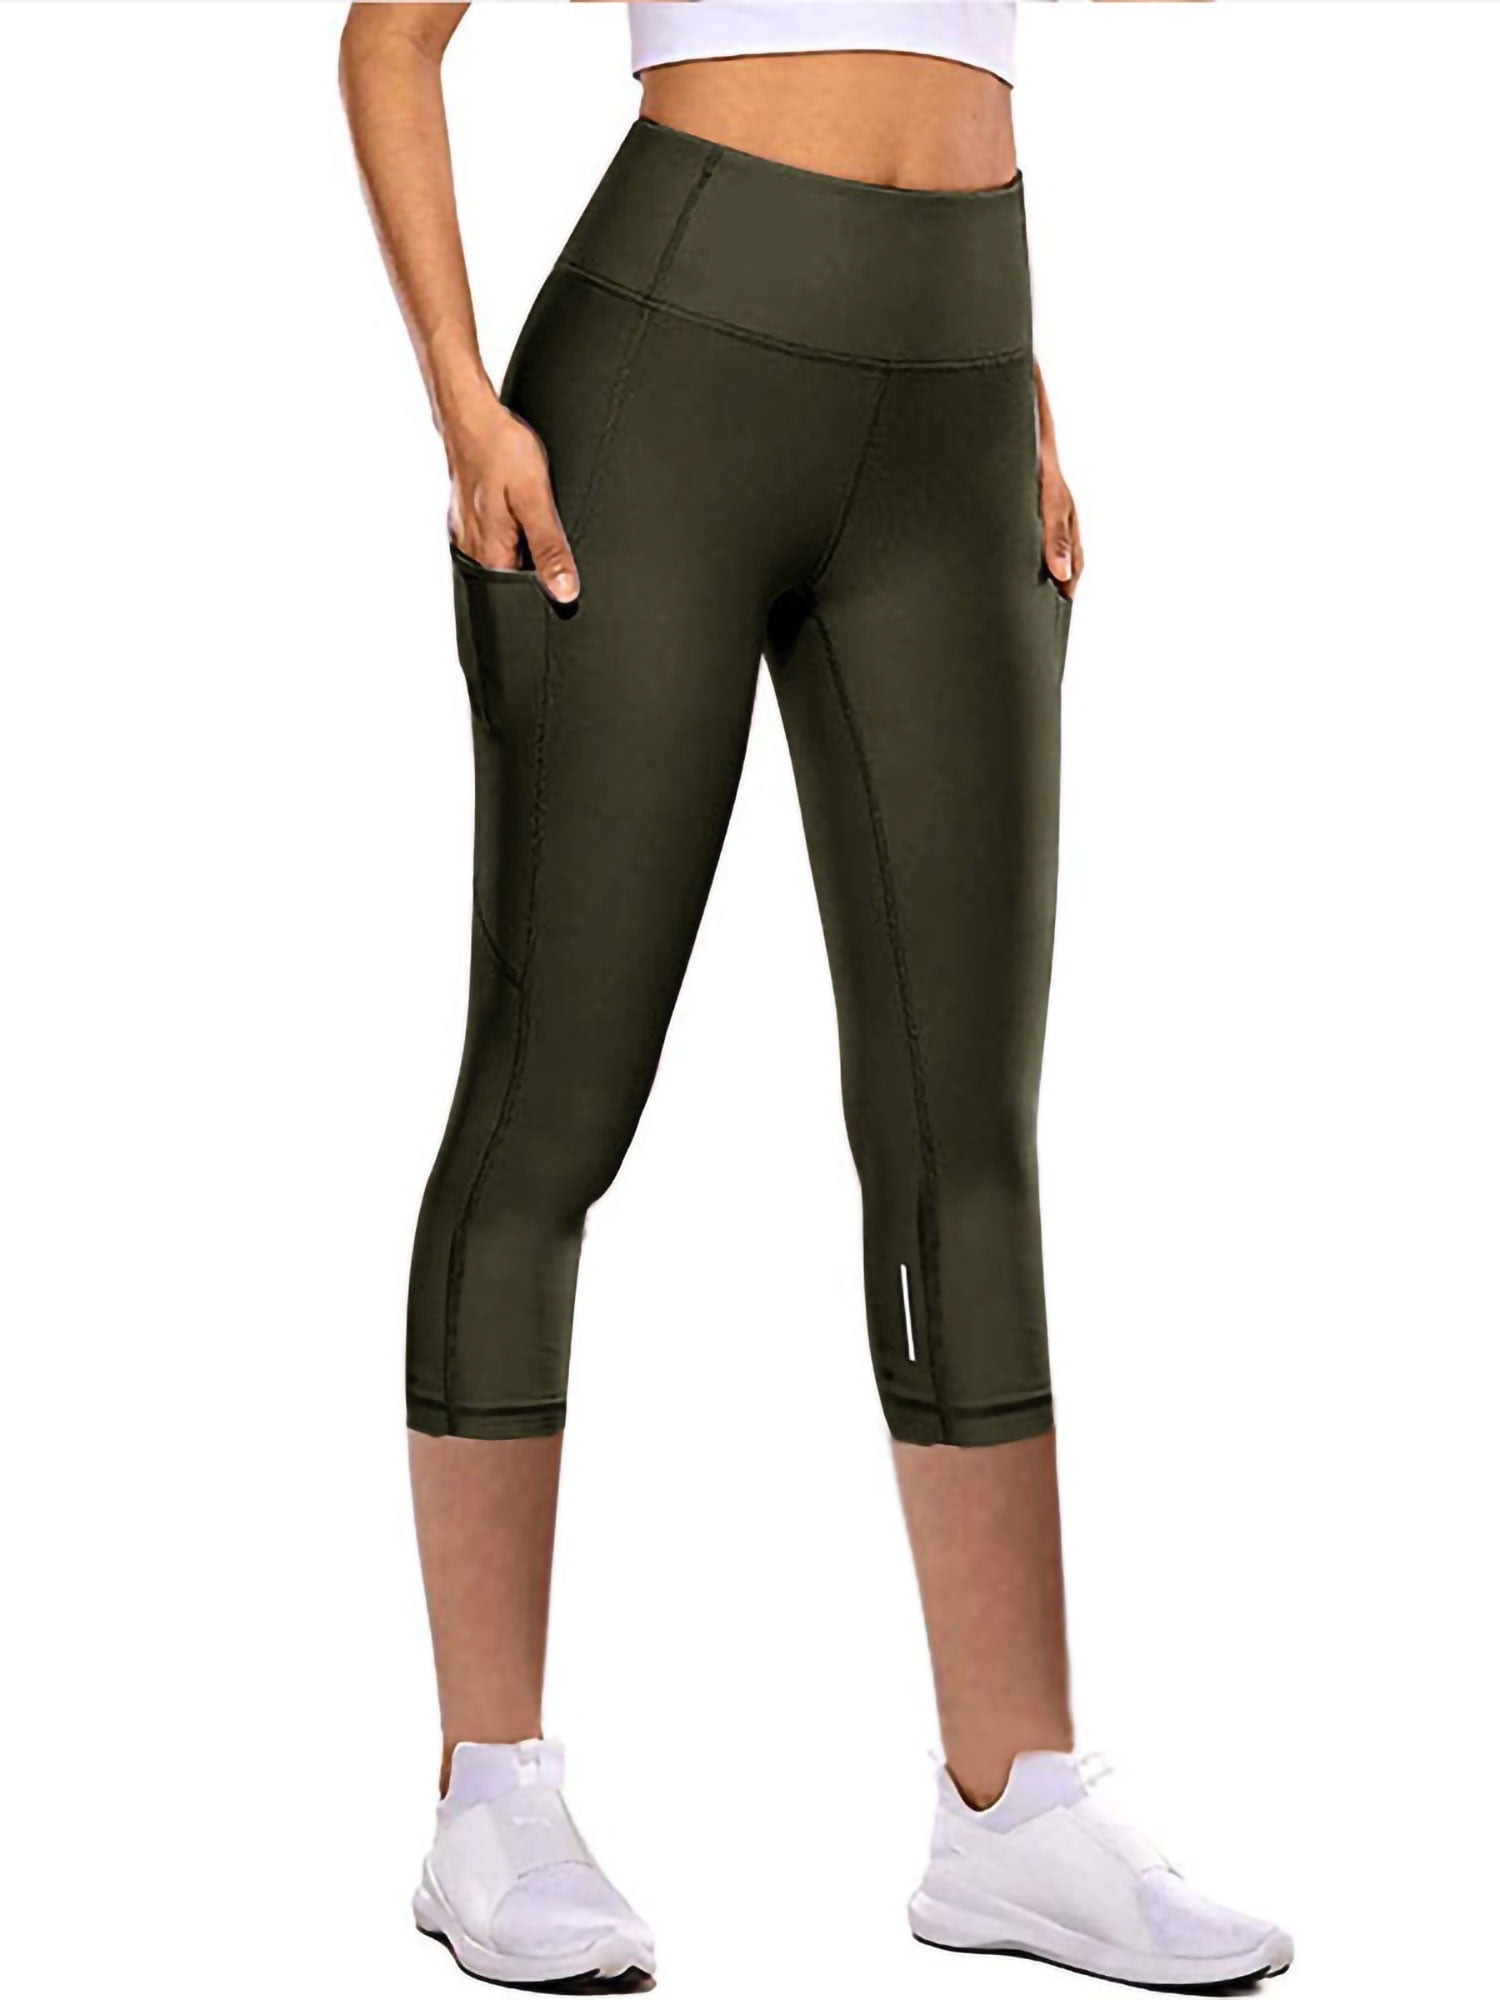 Womens Compression Leggings Capri Workout Running 3/4 Pants with Pocket & Mesh Panels